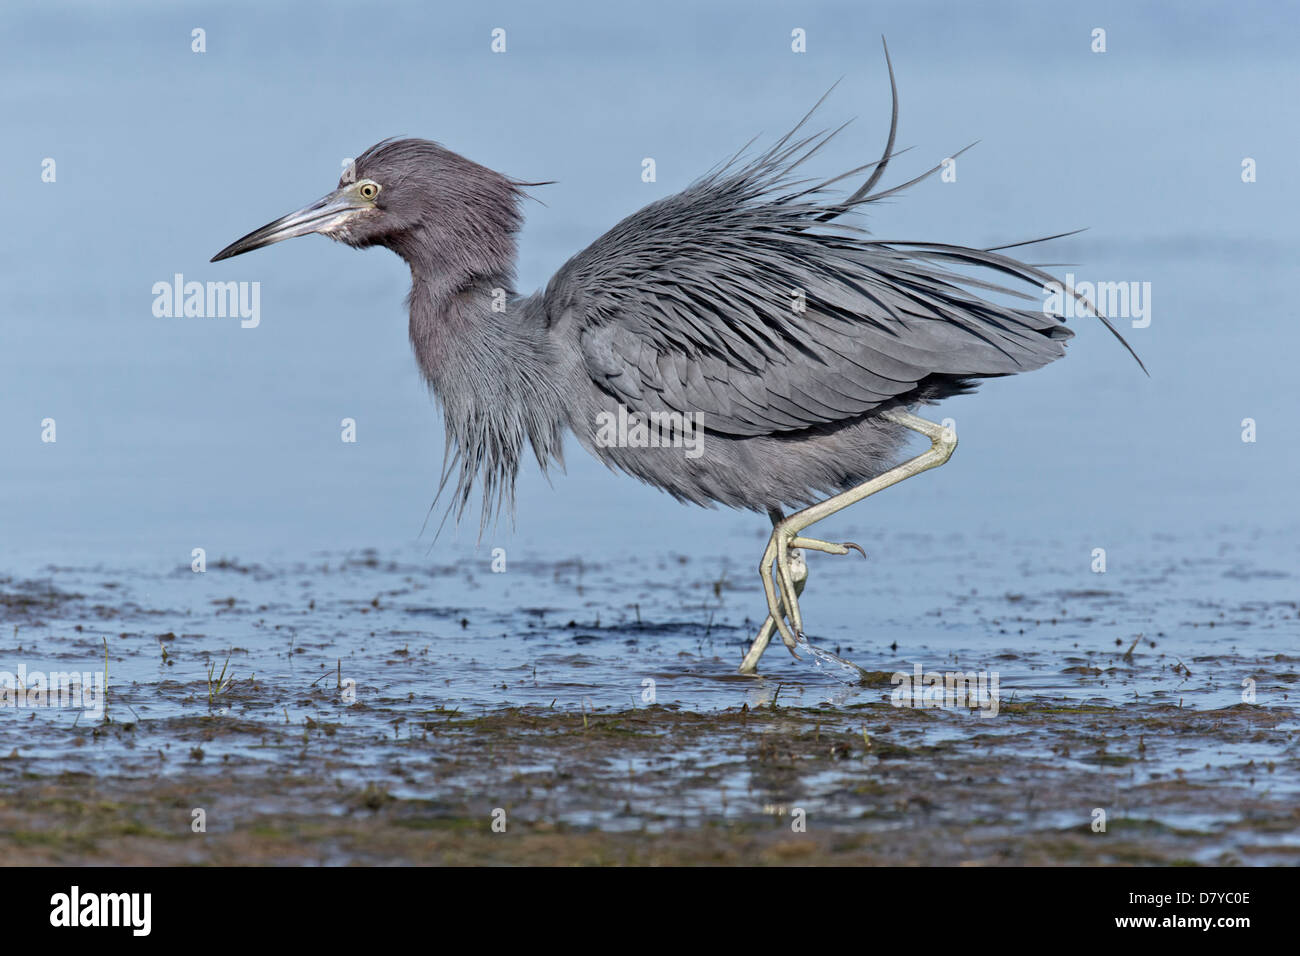 Little Blue Heron ruffling feathers after fishing Stock Photo